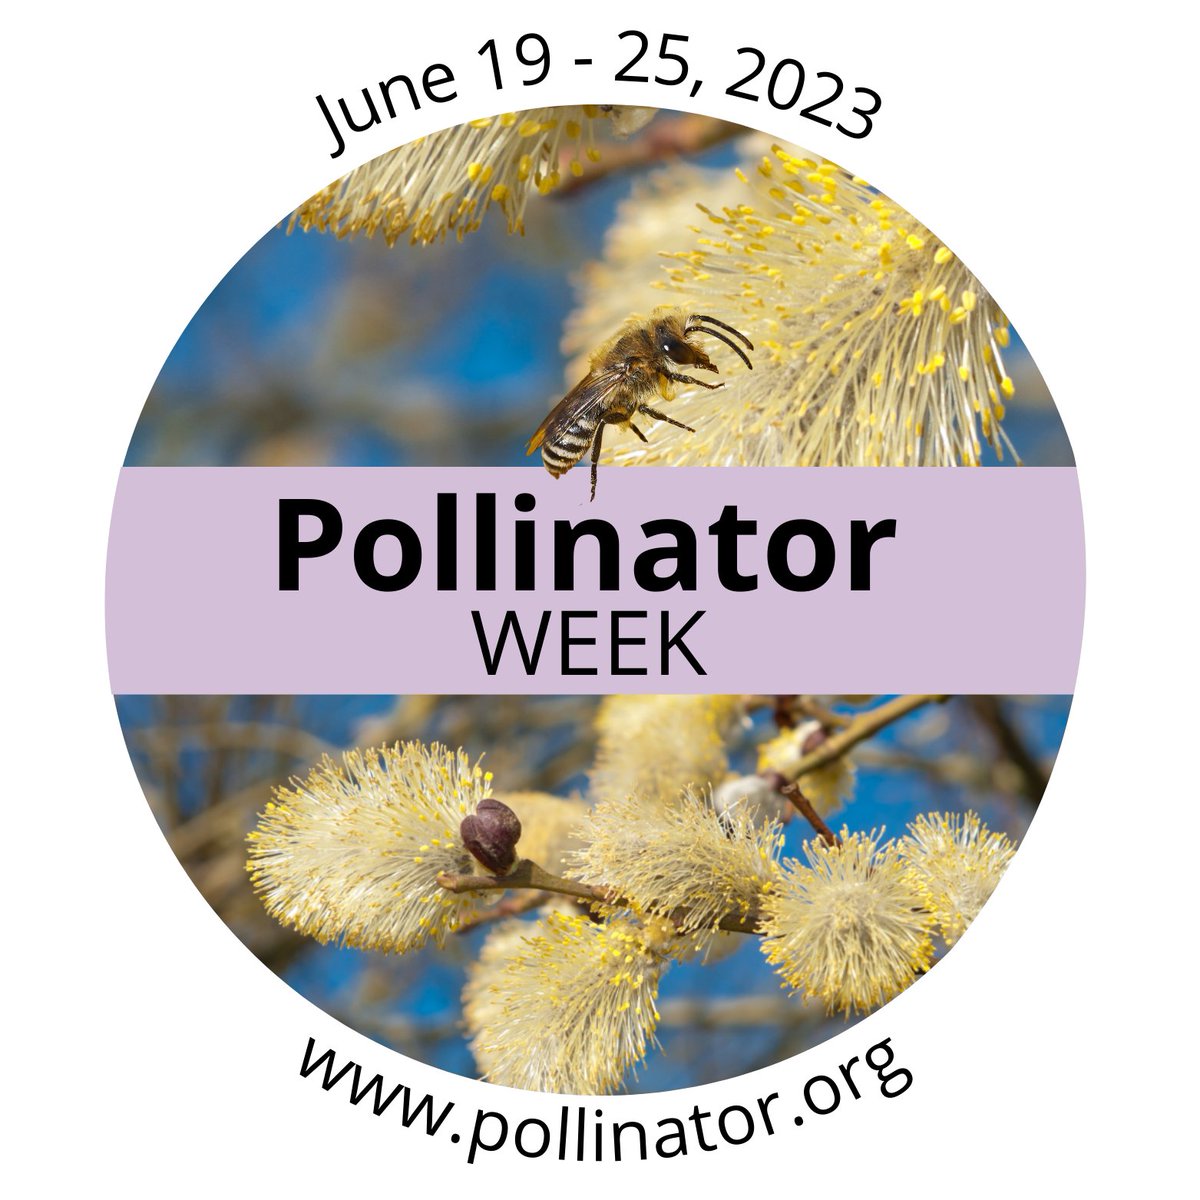 Bzzzzzz.🐝🐝🐝 In celebration of National Pollinator Week,  King is offering two free activities: Attracting Pollinators to Your Garden Workshop on June 21 and Pollinator Walk & Talk on June 25.
Pre-registration is required. Visit king.ca/recreation. #PollinatorWeek